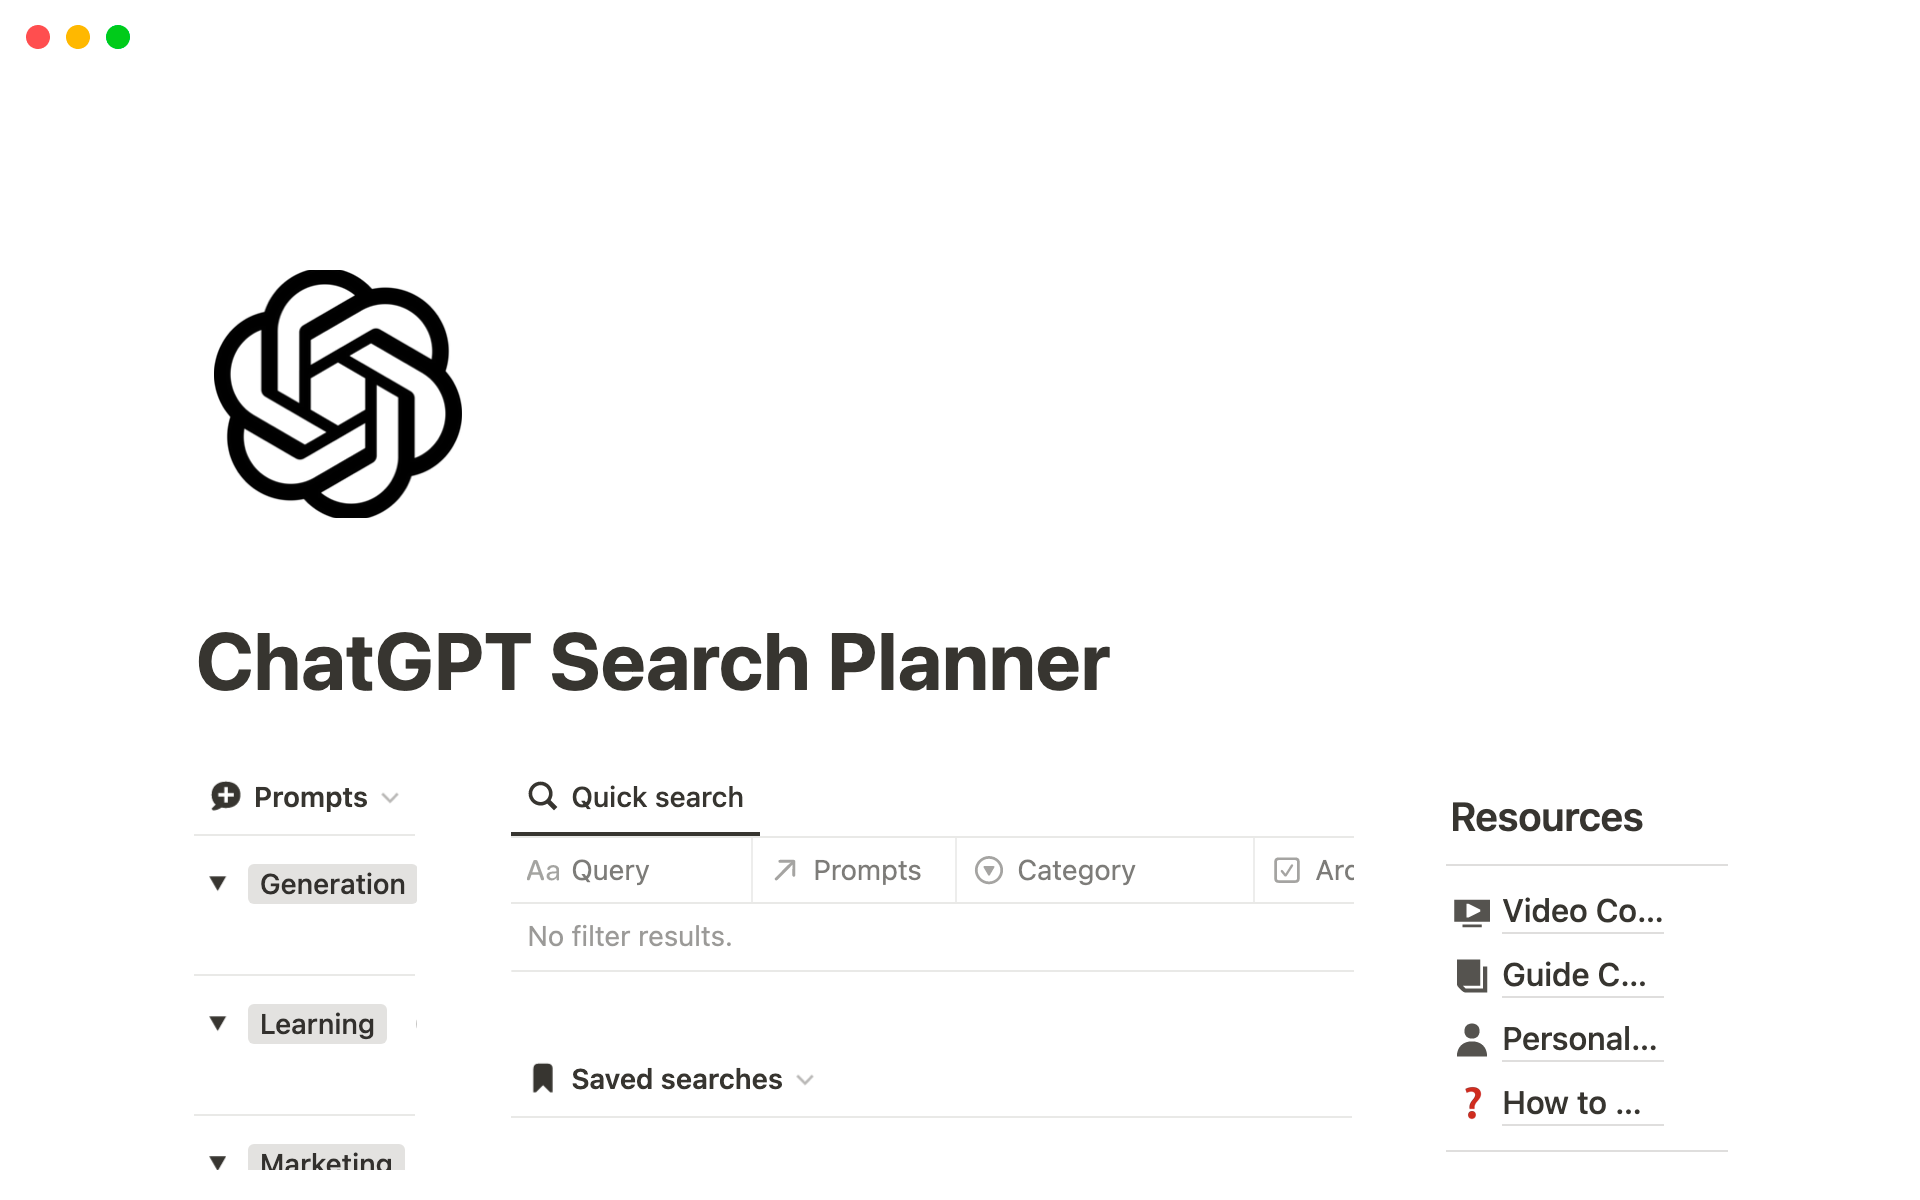 The Ultimate Search Planner to organize and streamline ChatGPT searches, prompts and resources in one place.